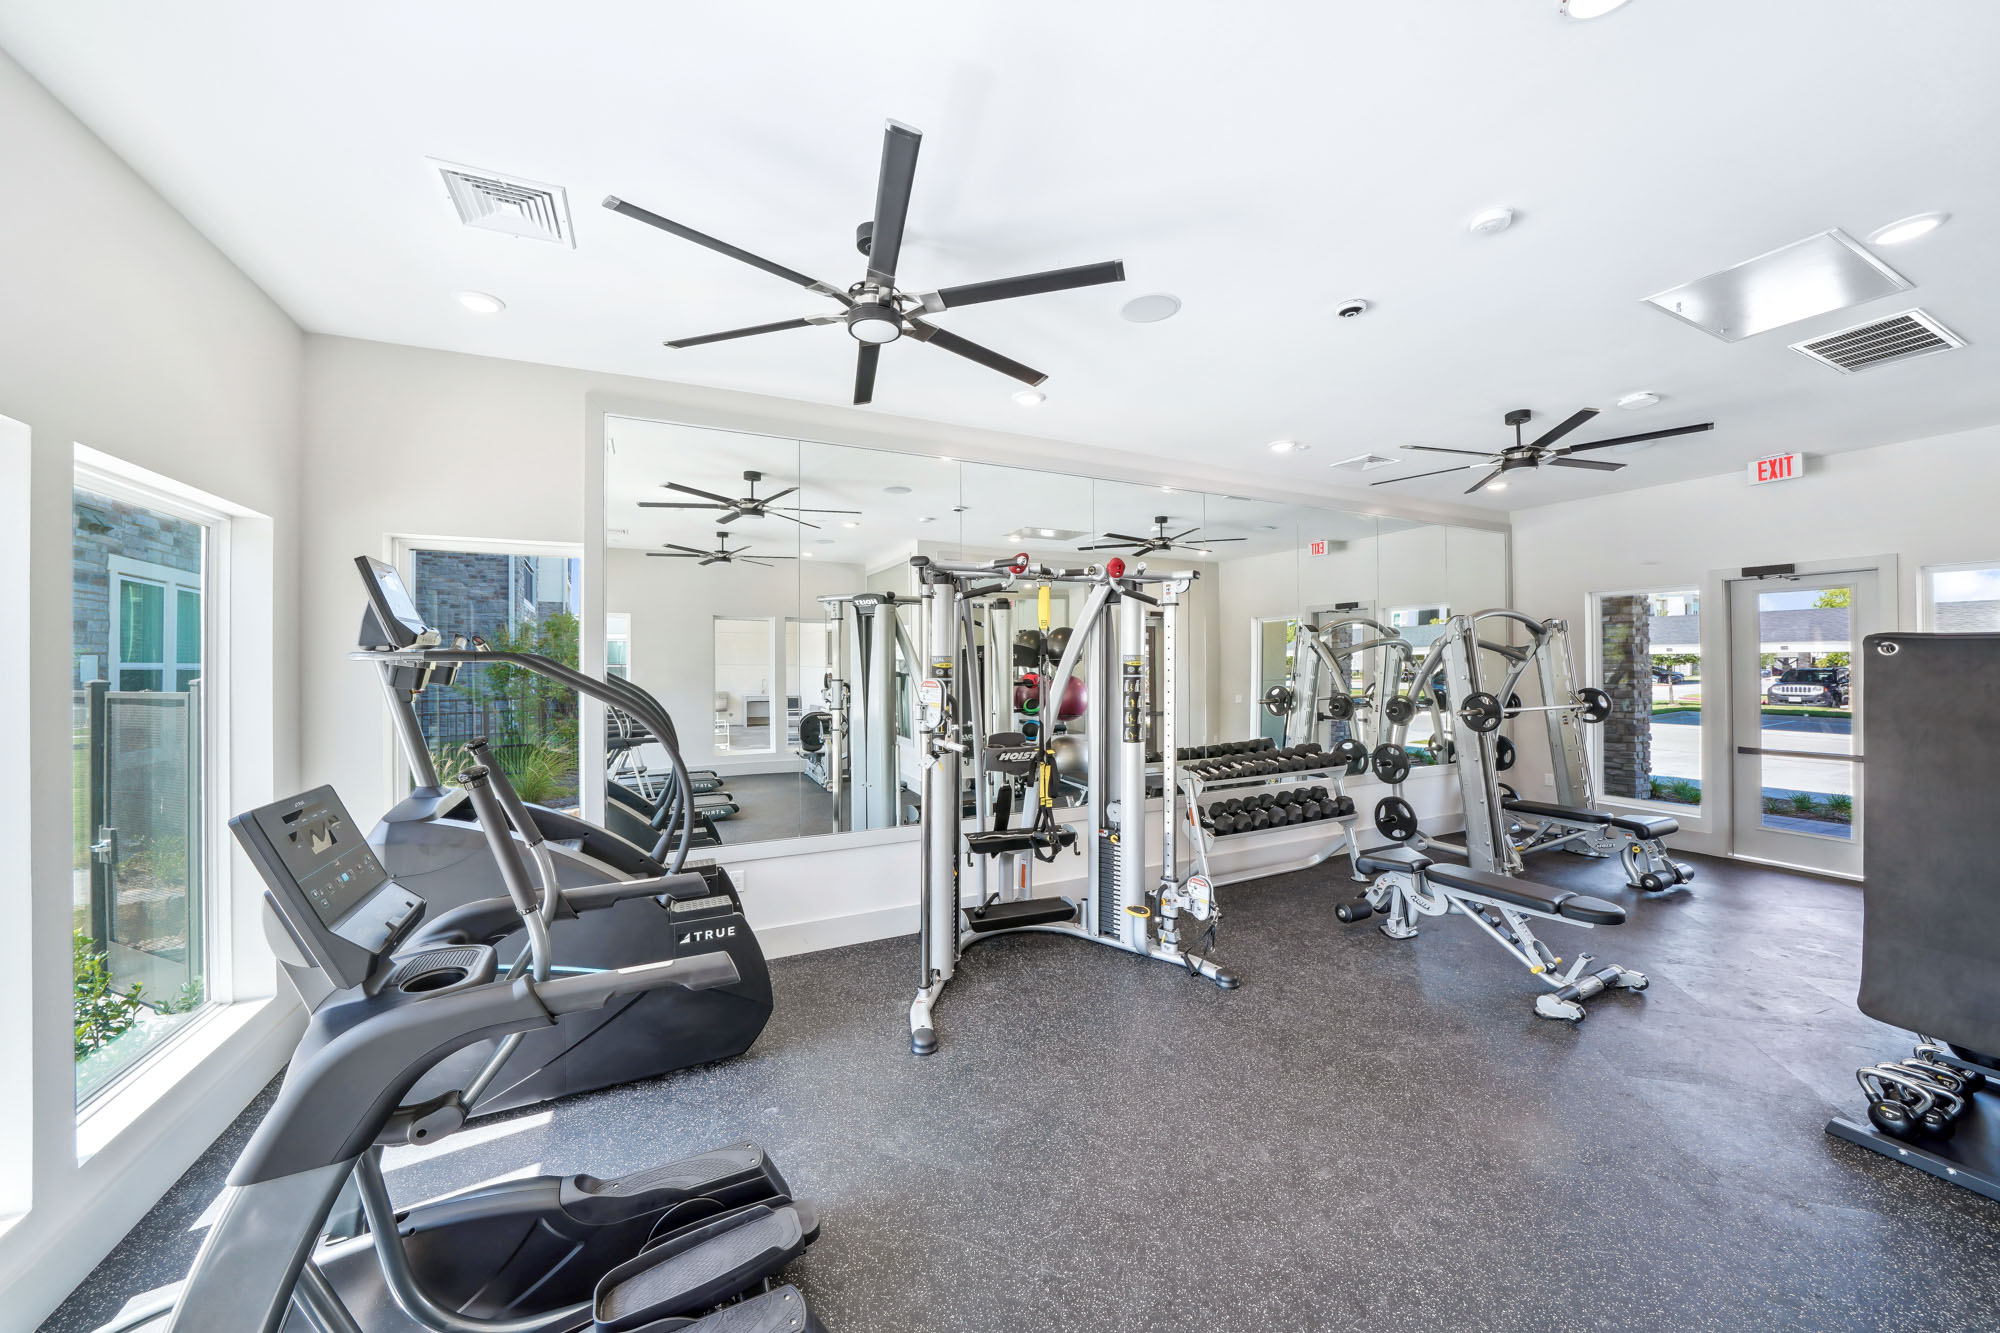 The fitness center at Embree Hill apartments in Dallas, TX.